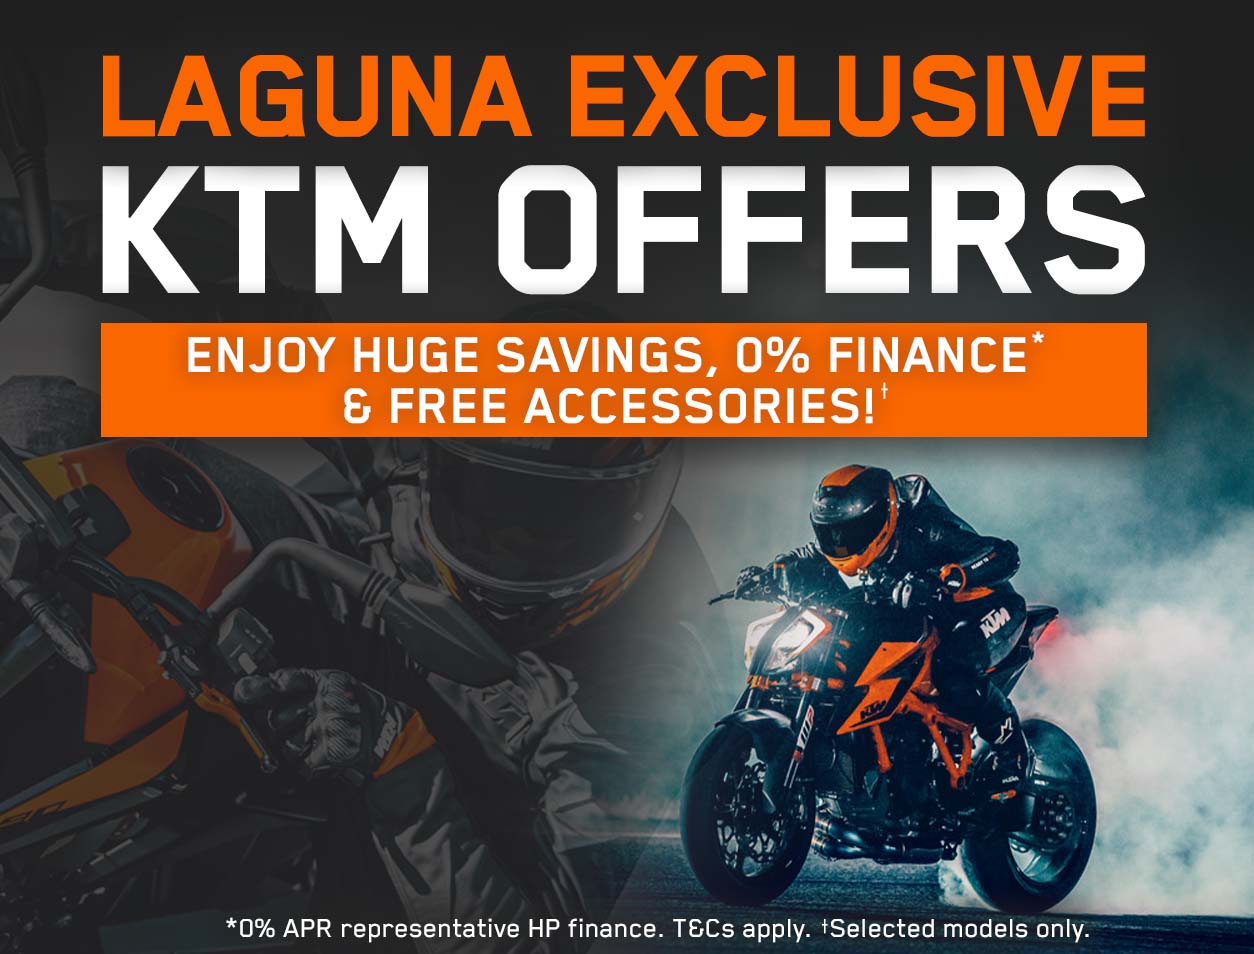 Laguna Motorcycles exclusive KTM offers